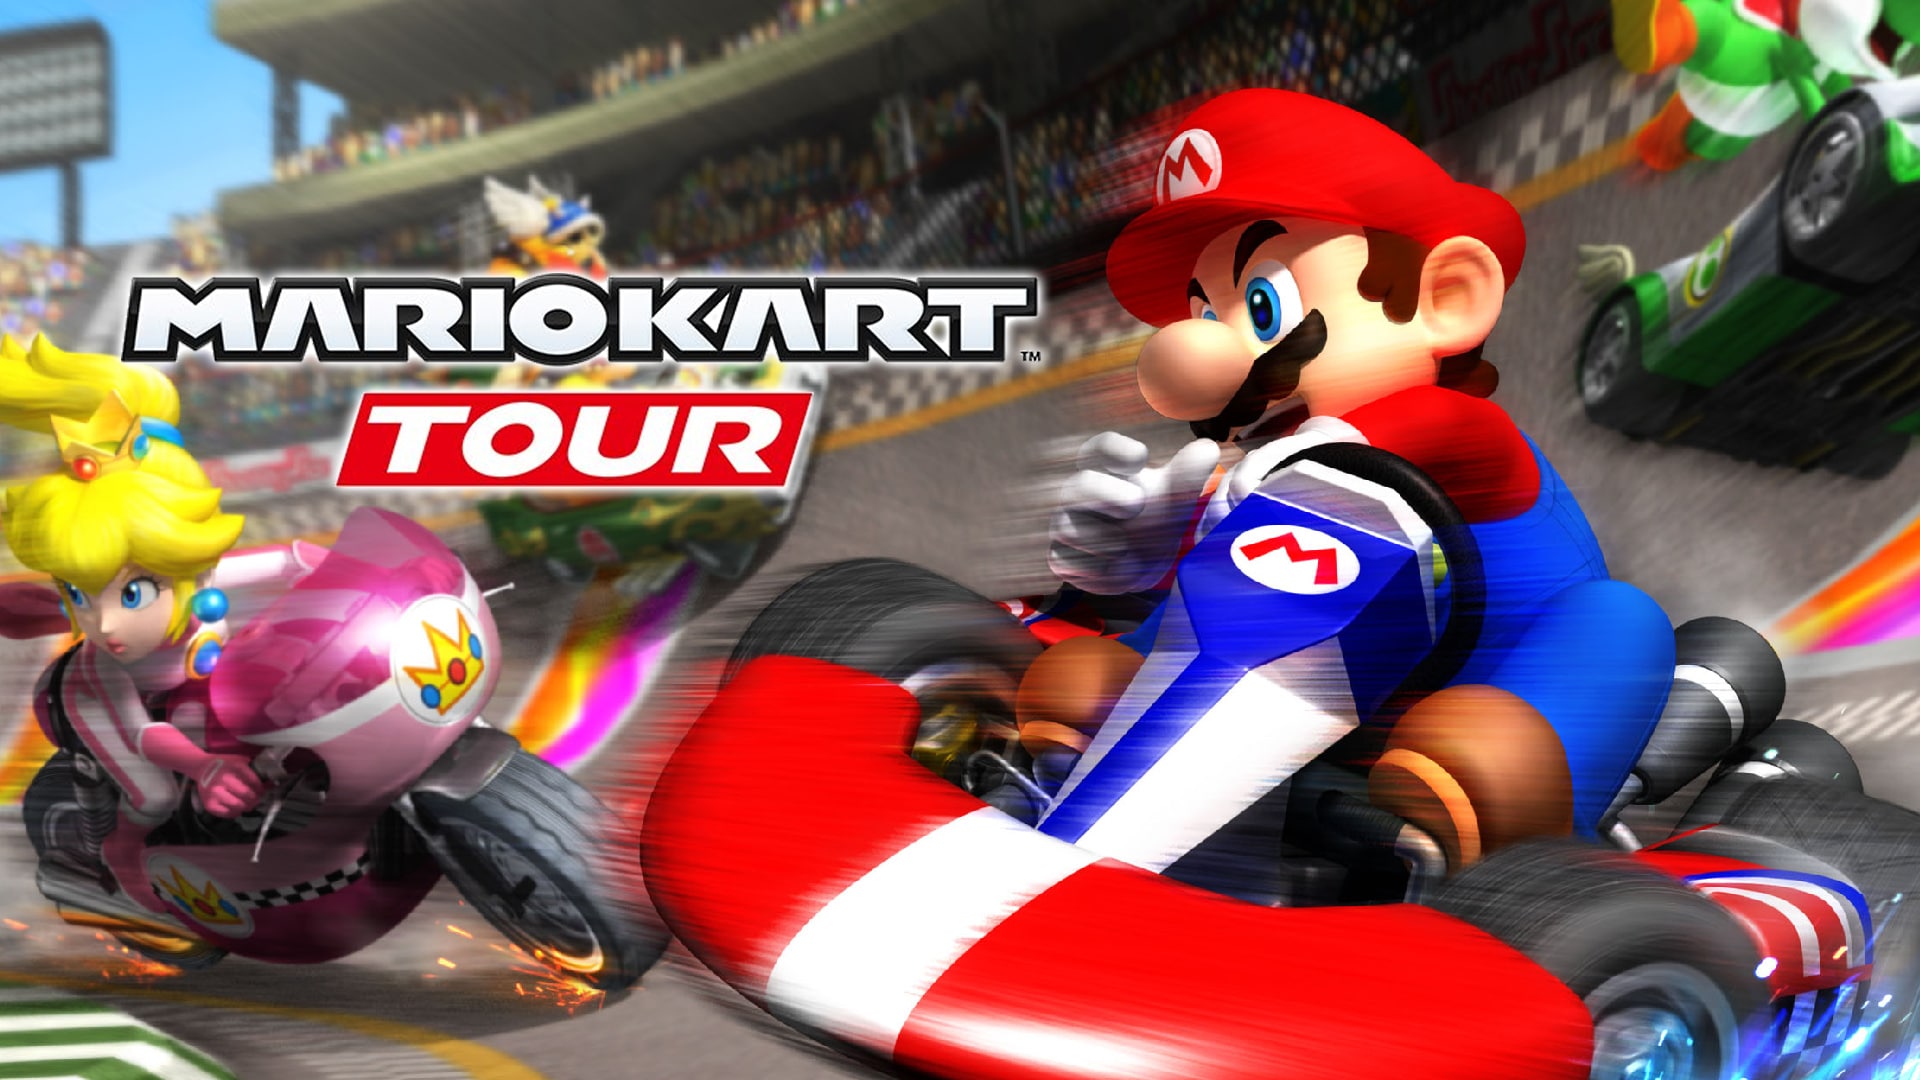 Mario Kart Tour to release this fiscal year